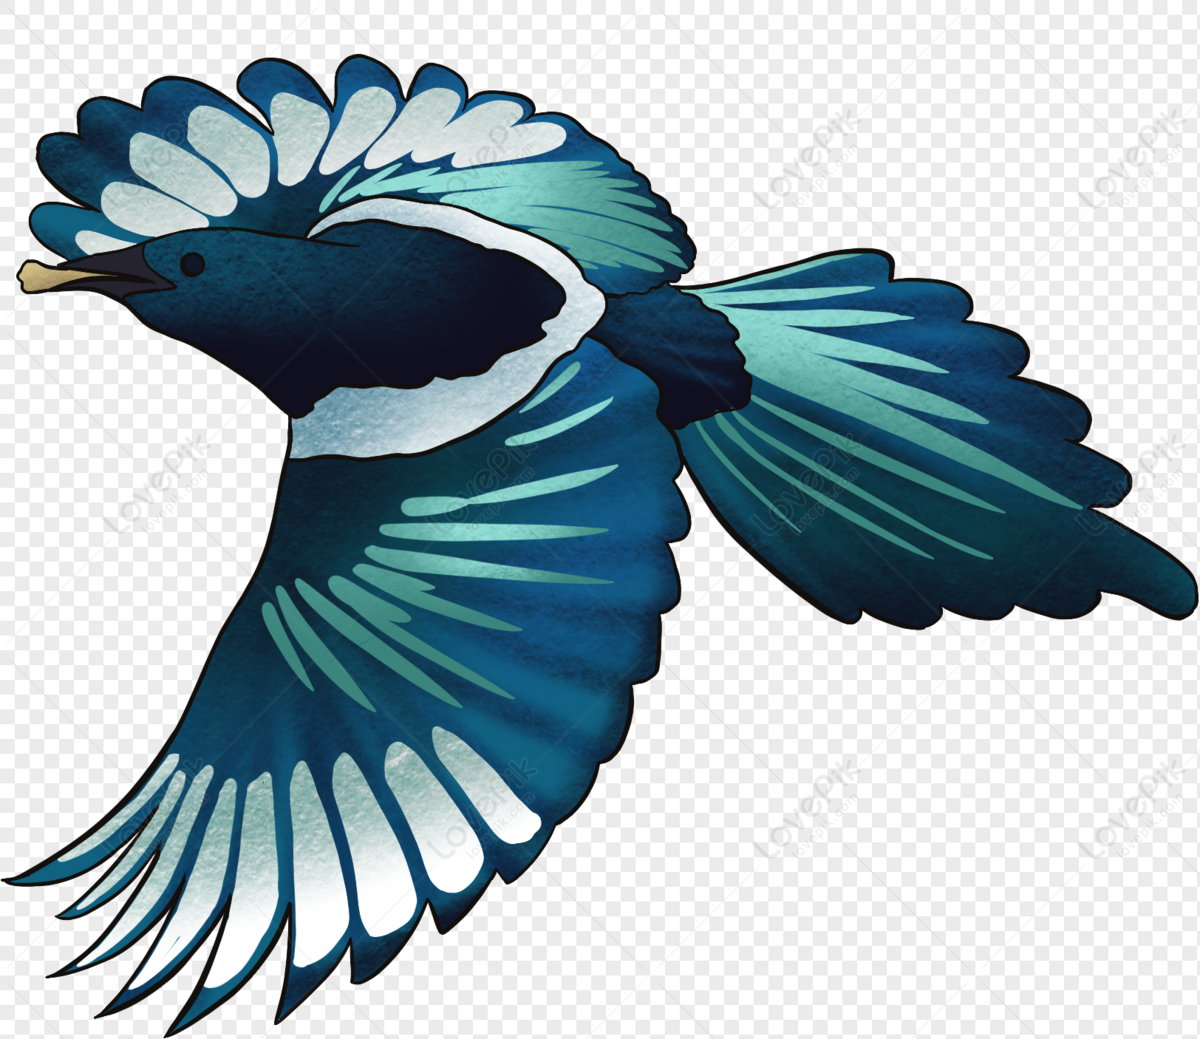 Blue jay Silhouette Vector, Clipart Images, Pictures